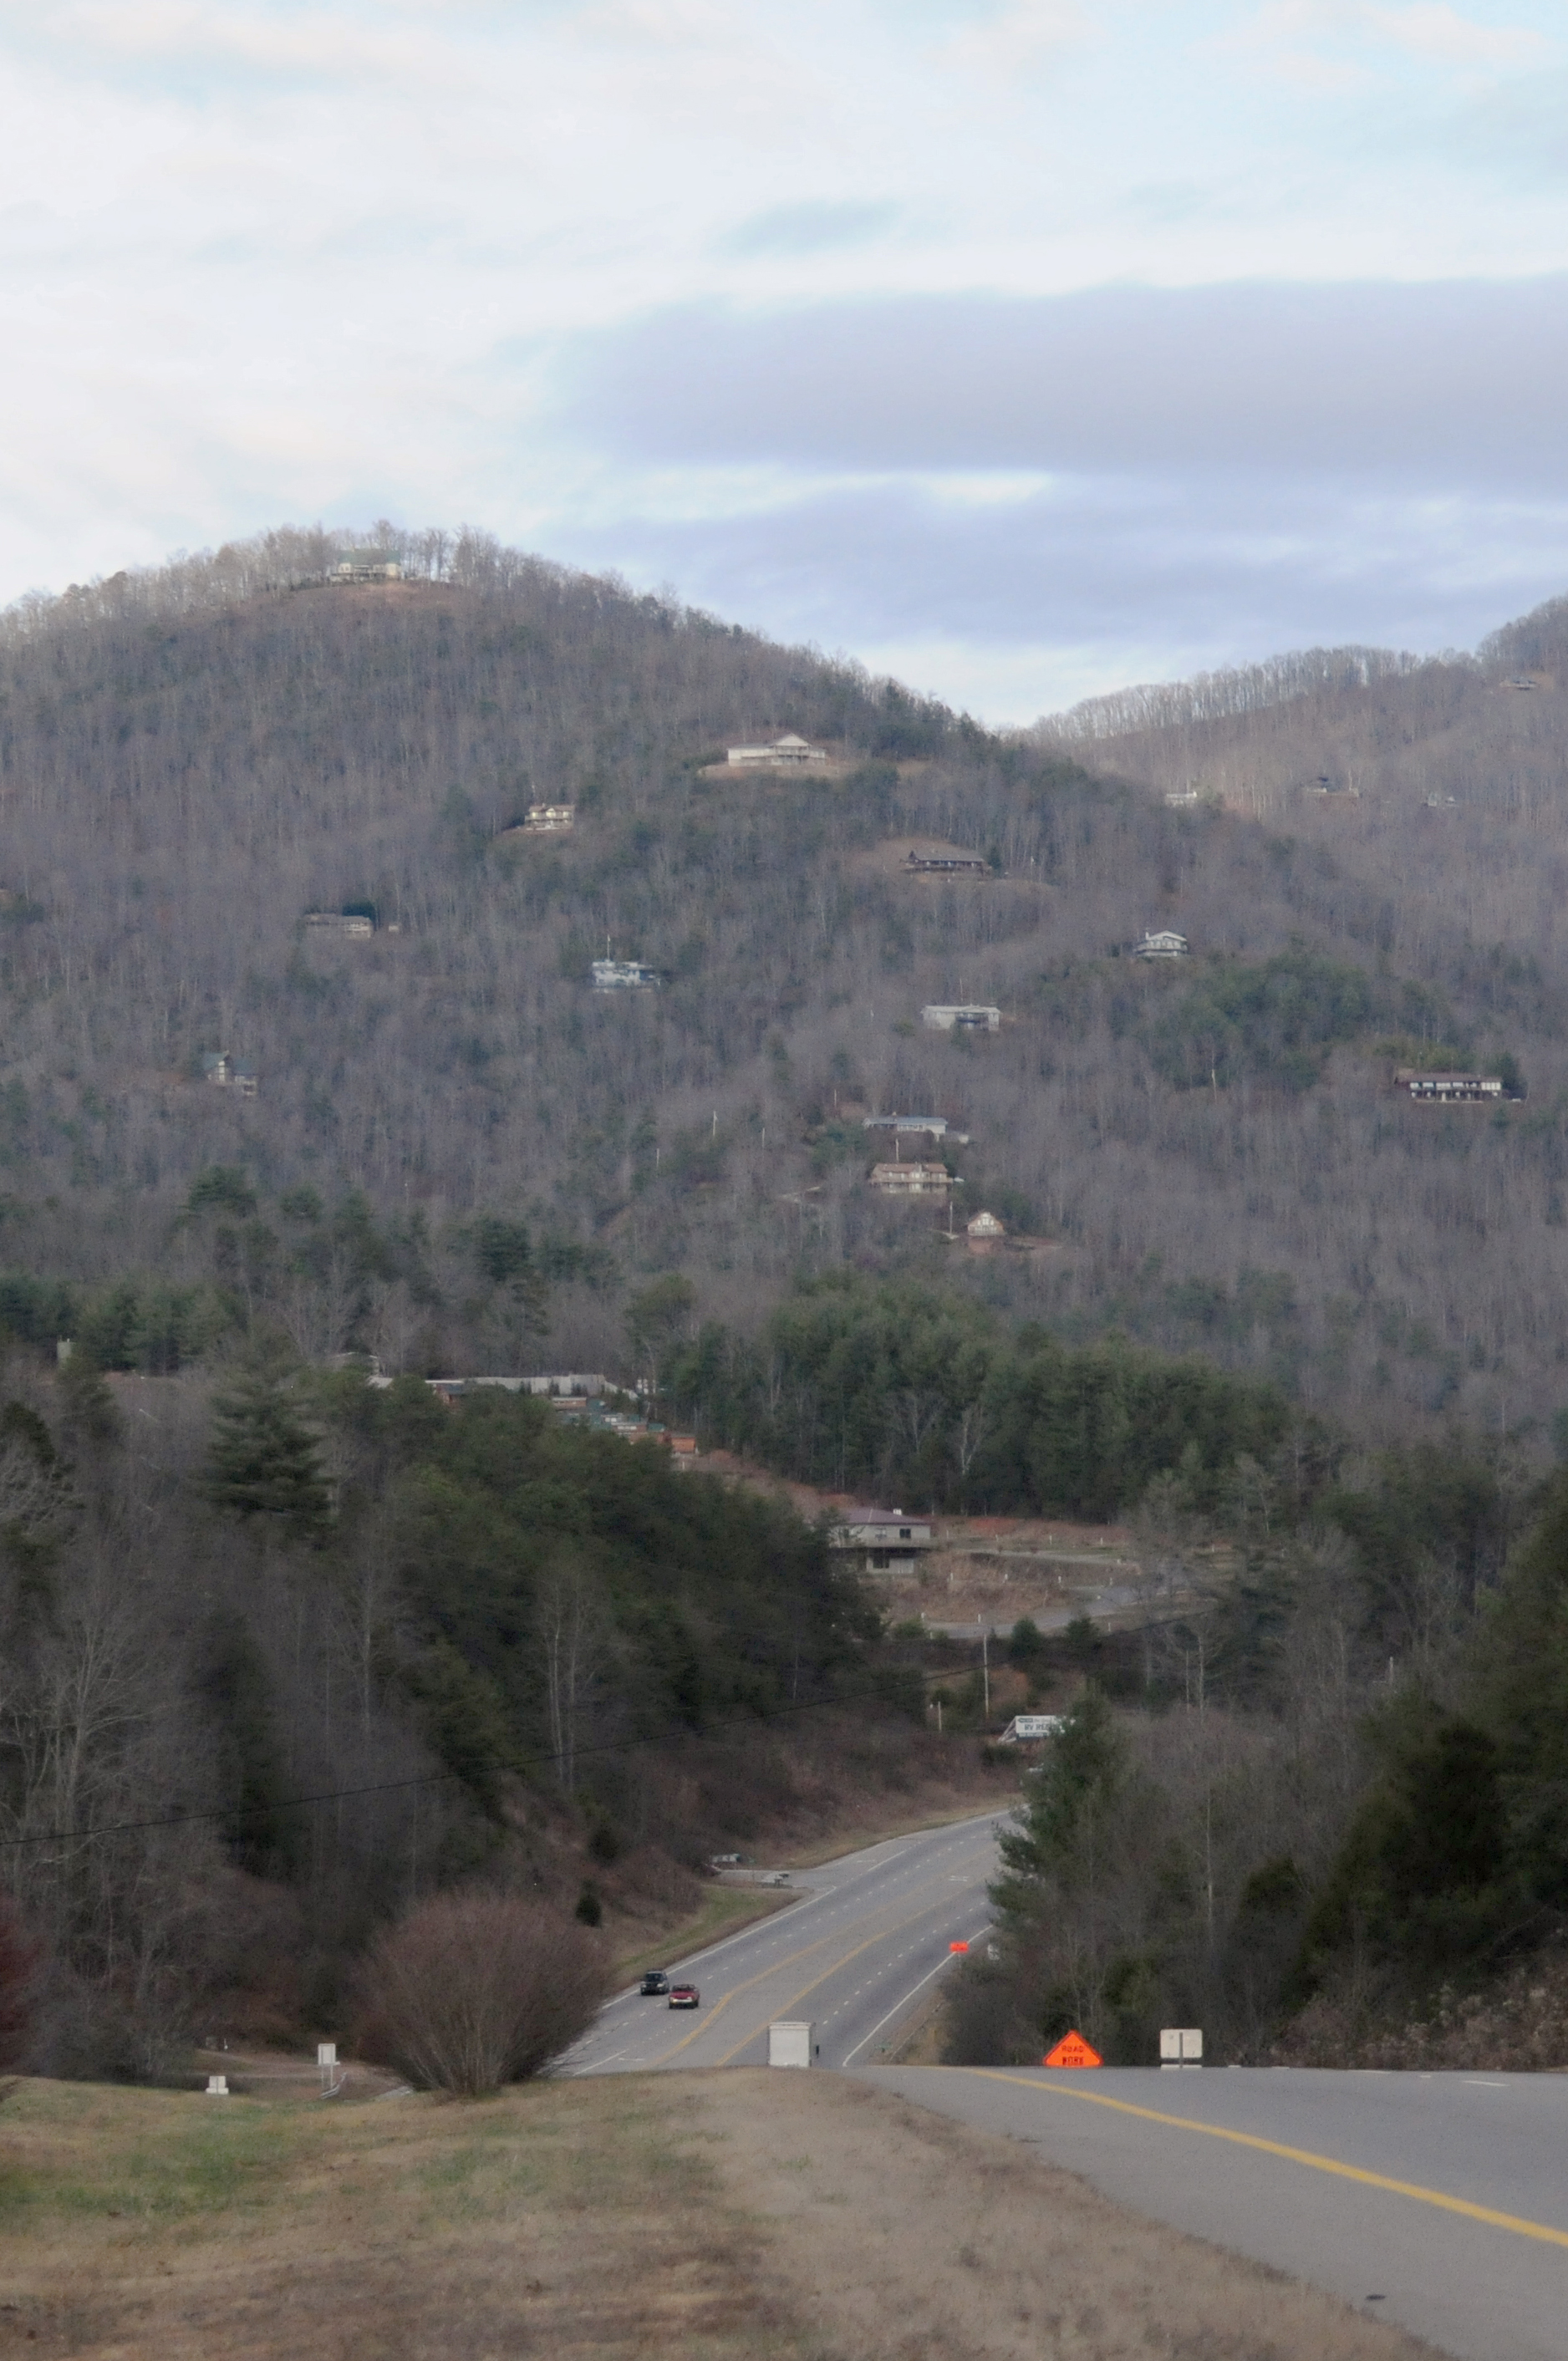 A view from the highway looks out over rural homes that speckle the foothills of Appalachia in the winter